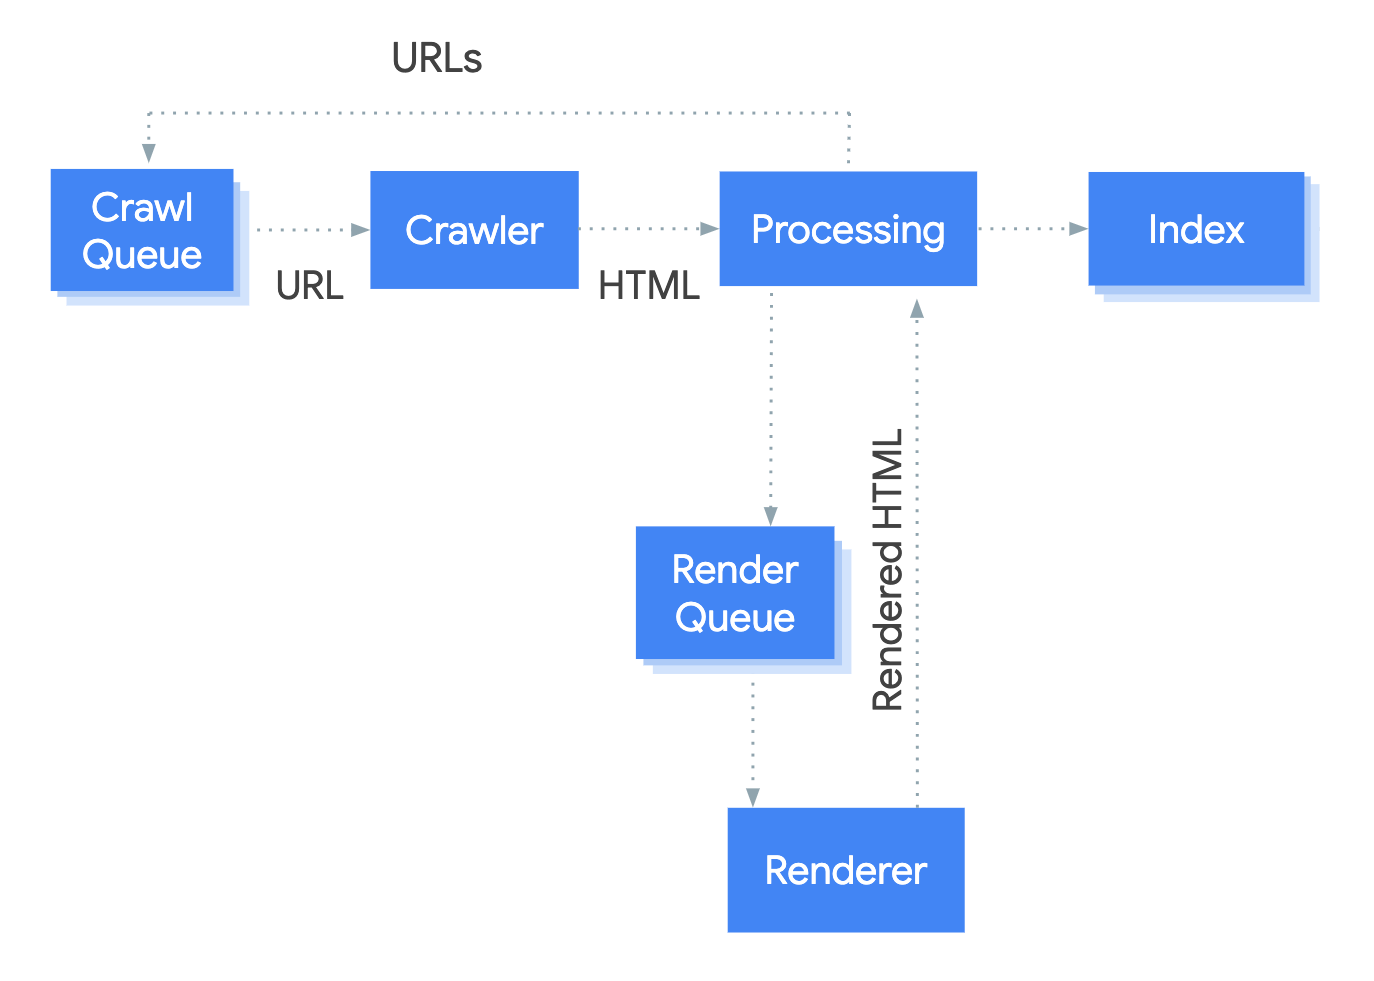 Diagram showing how Googlebot takes a URL from the crawl queue, crawls it, then passes it into the processing stage. The processing stage extracts links that go back on the crawl queue and queues the page for rendering. The page goes from the render queue to the renderer which passes the rendered HTML back to processing which indexes the content and extracts links to put them into the crawl queue.